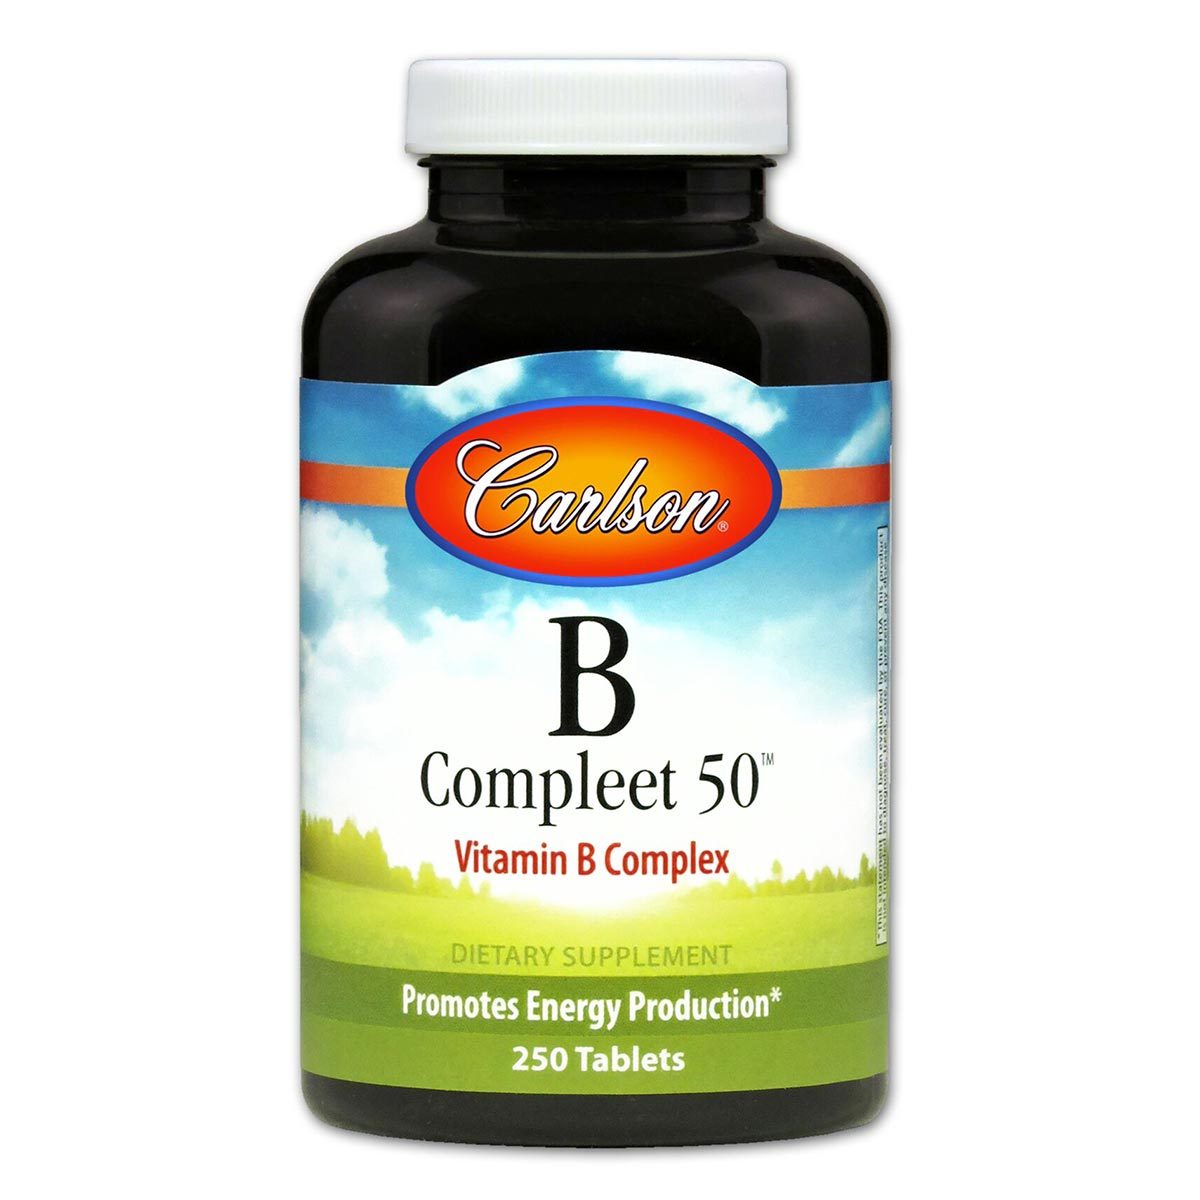 Primary image of B Compleet 50